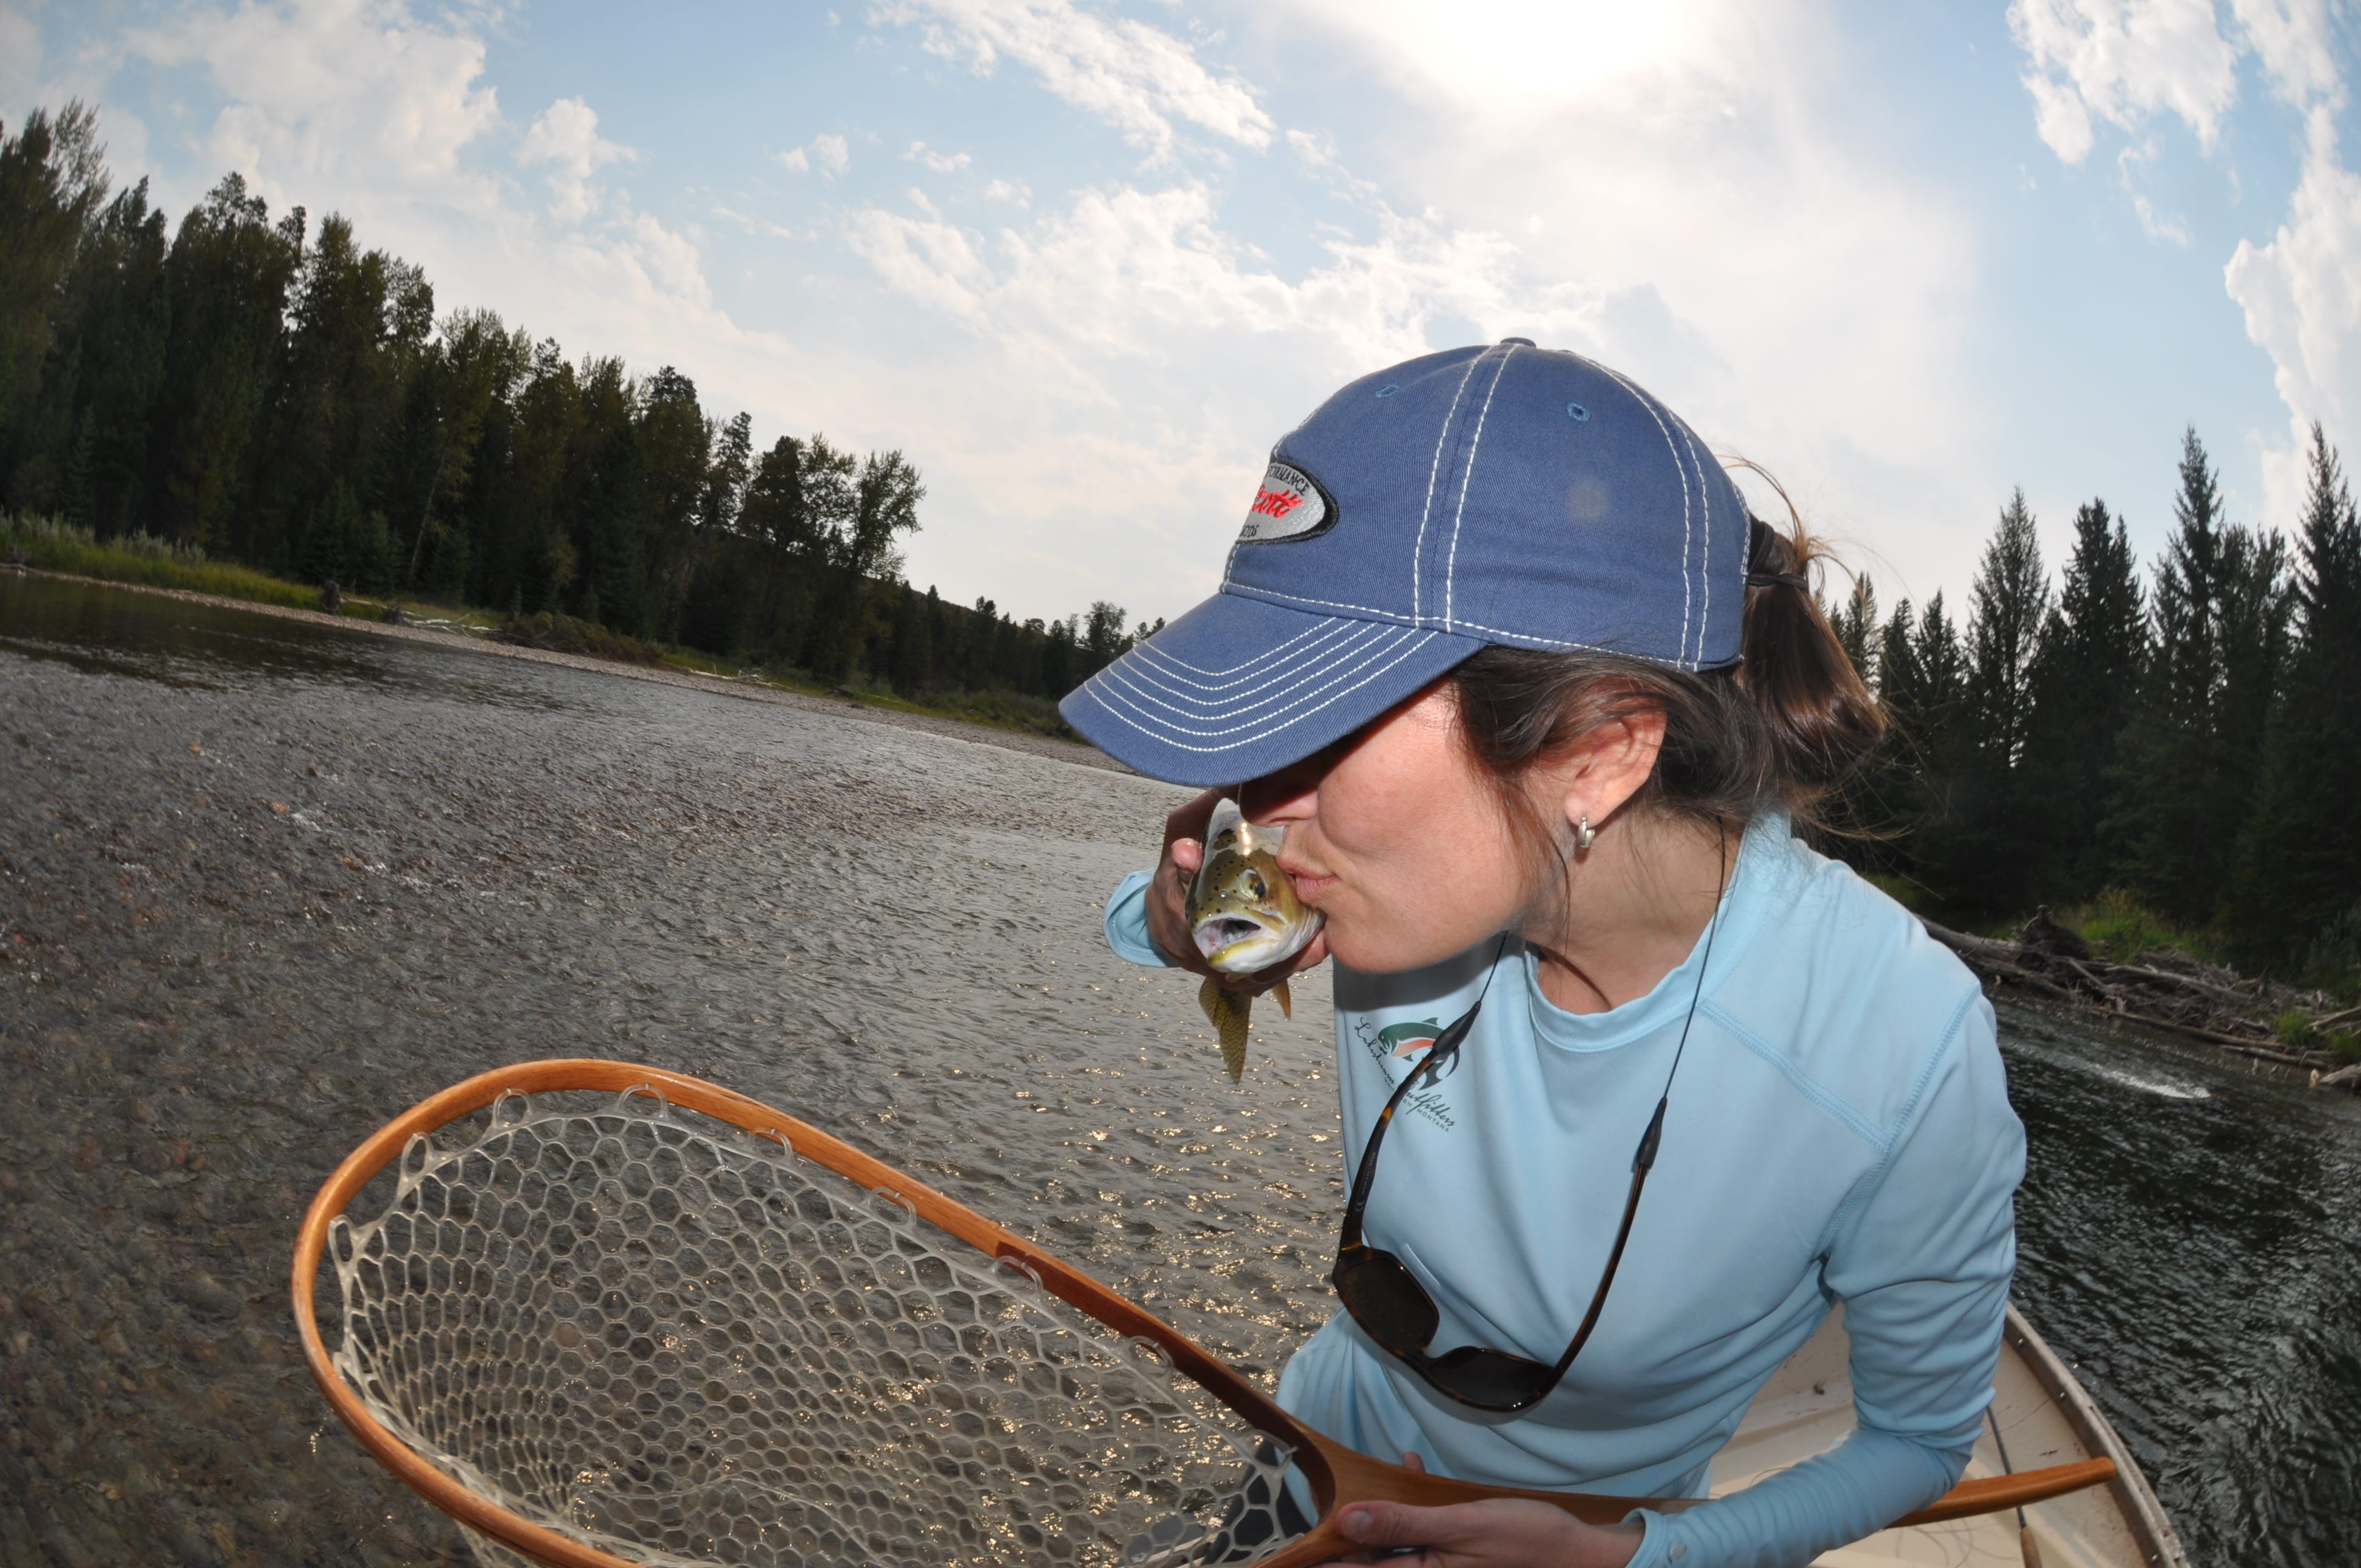 Book Your Trip - Guided Fly Fishing Bigfork Montana, Kalispell